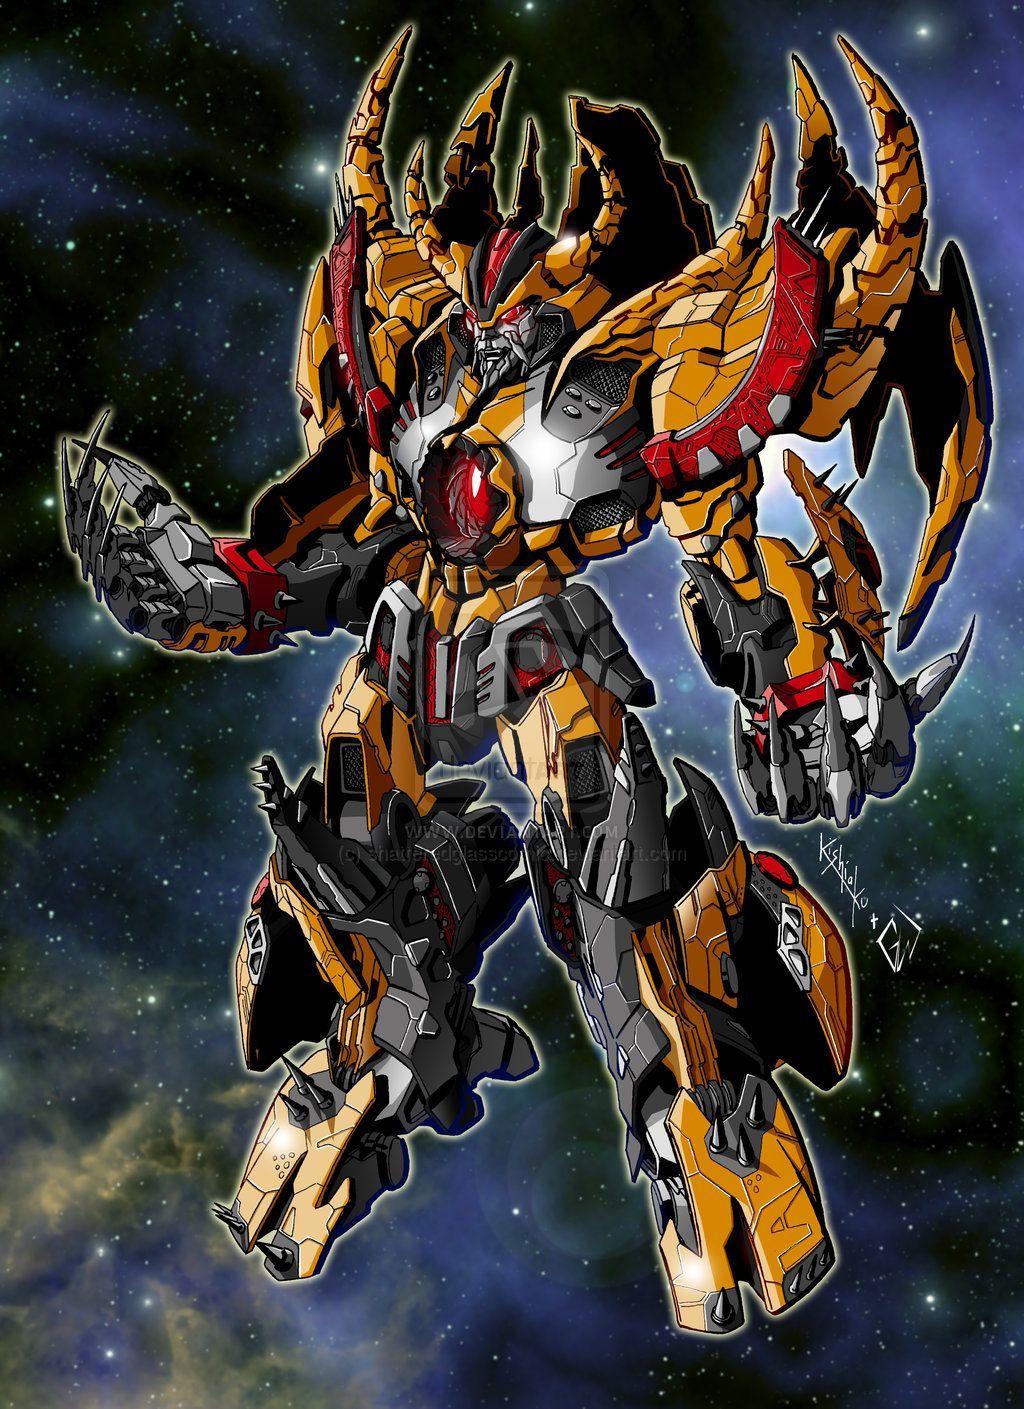 Unicron Final render, from Tf Cybertronians